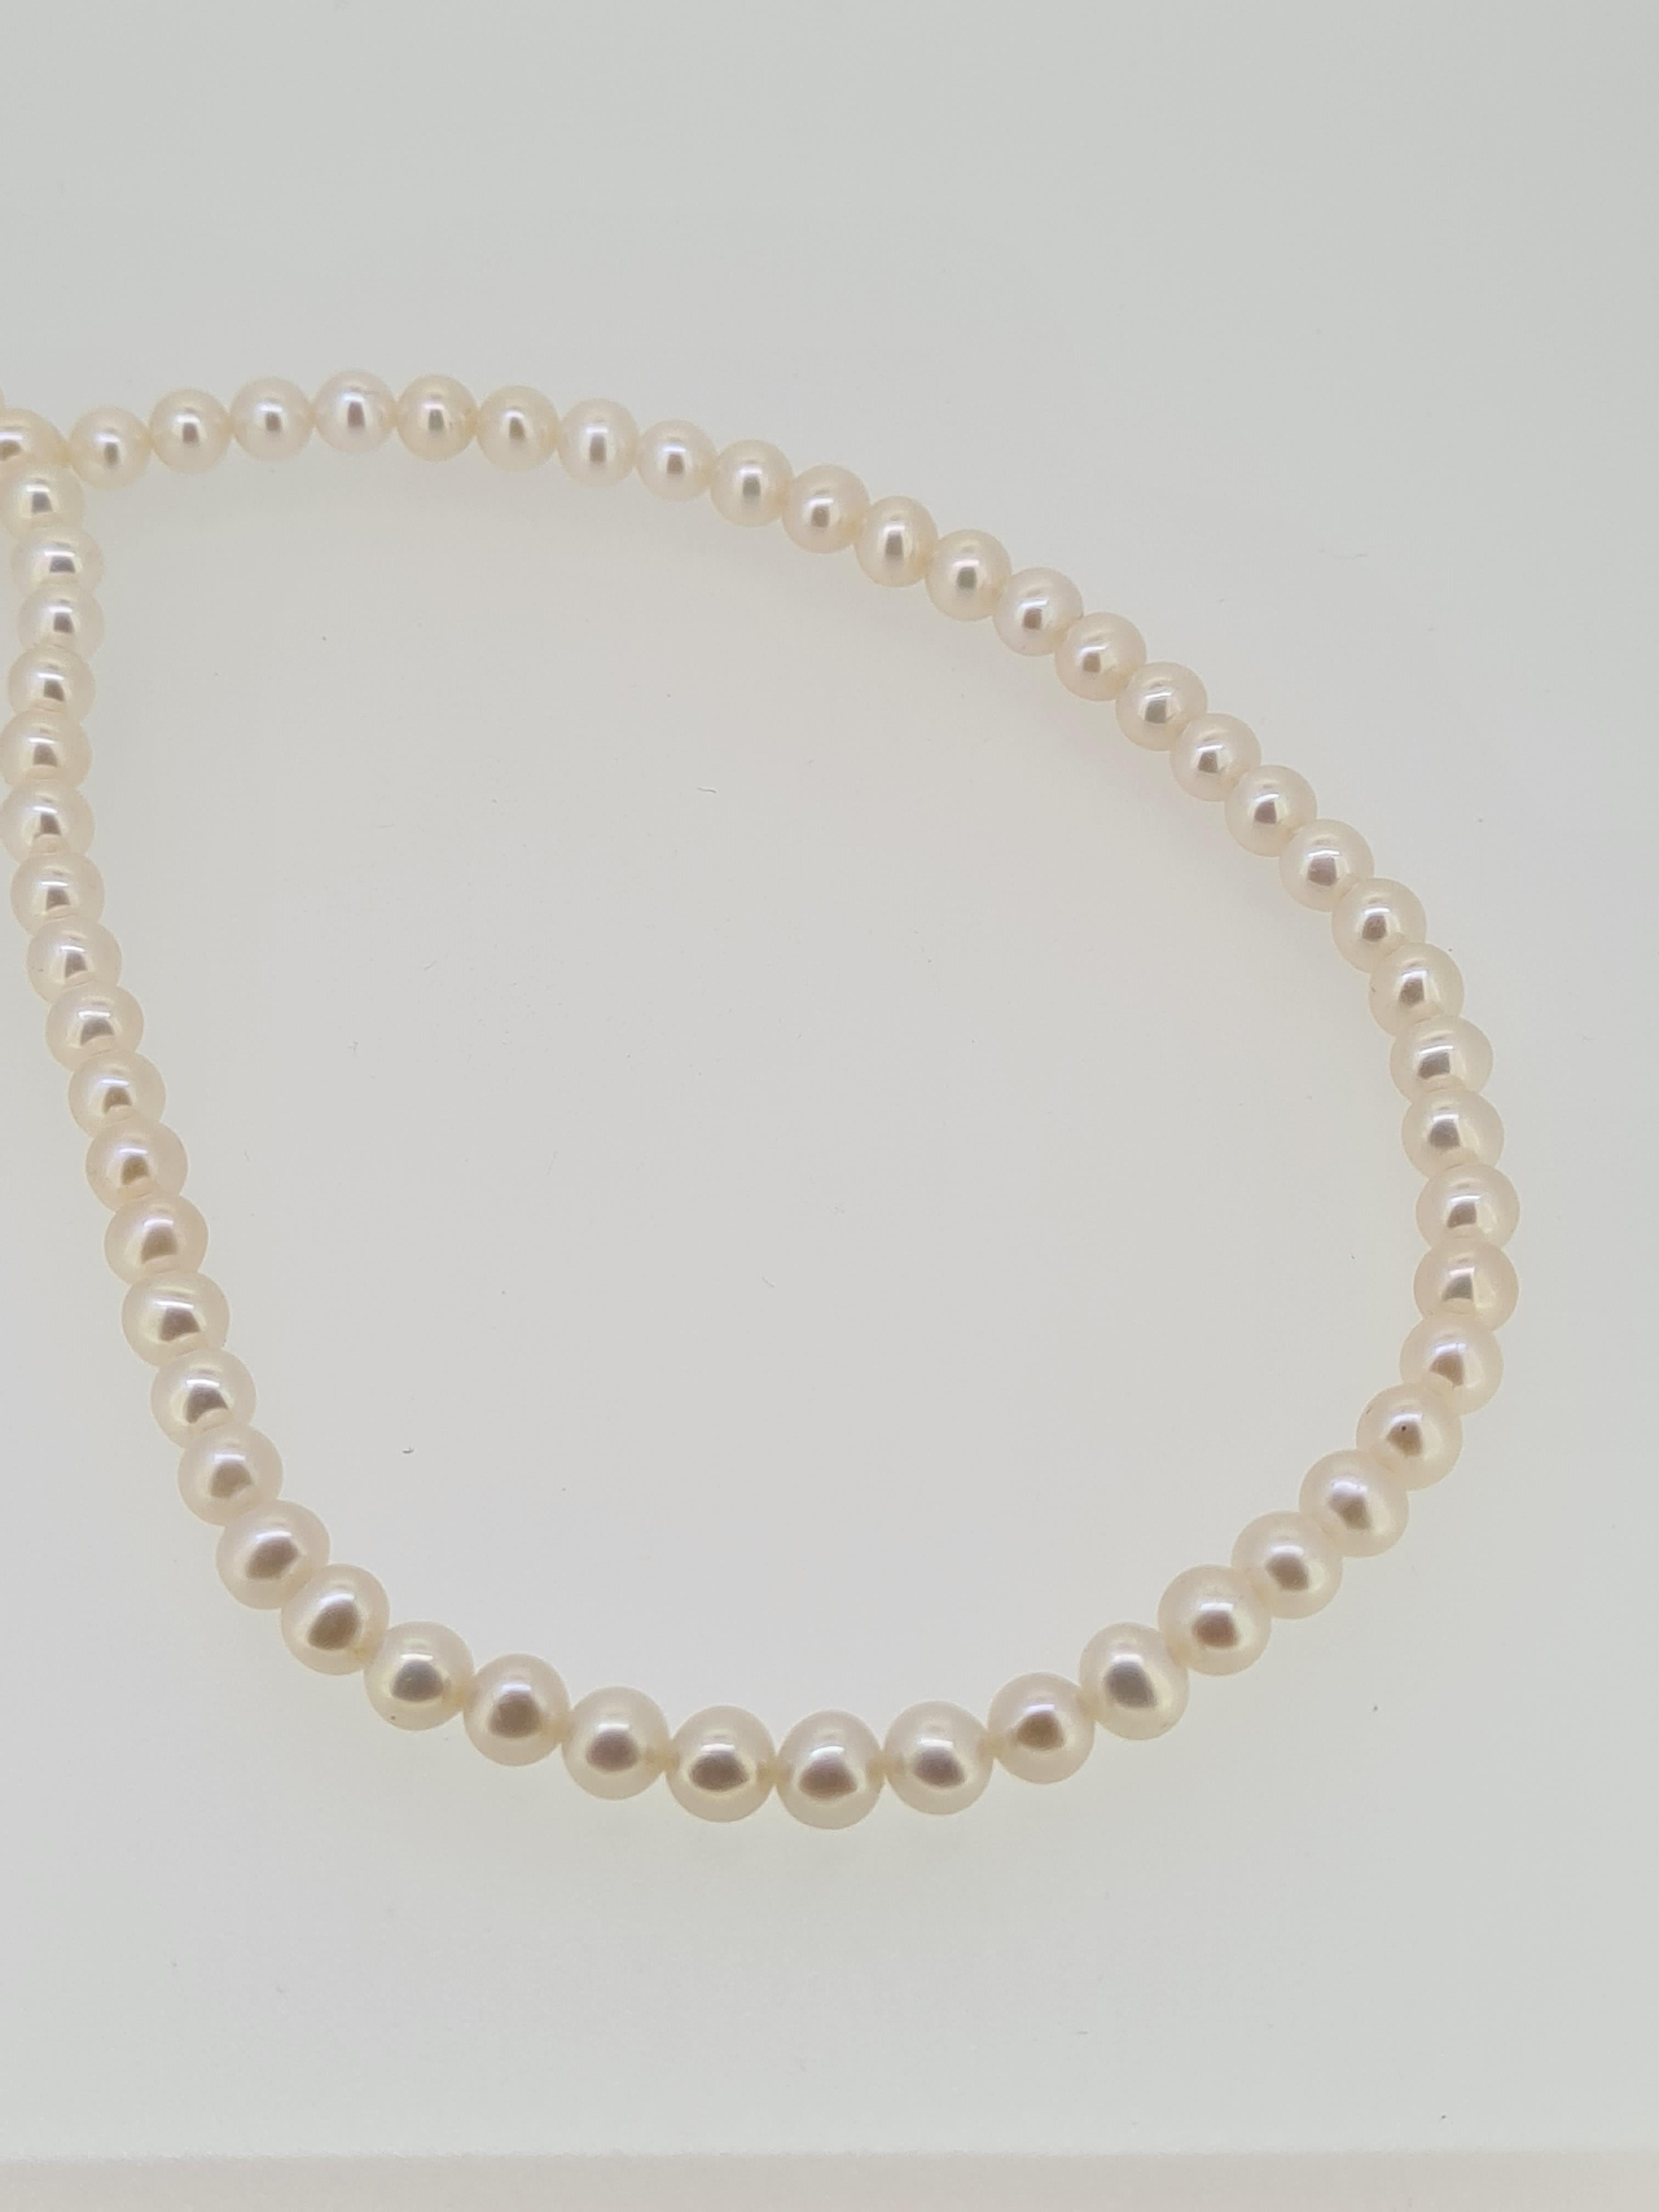 9ct clasp fresh water cultured pearls - Image 3 of 3